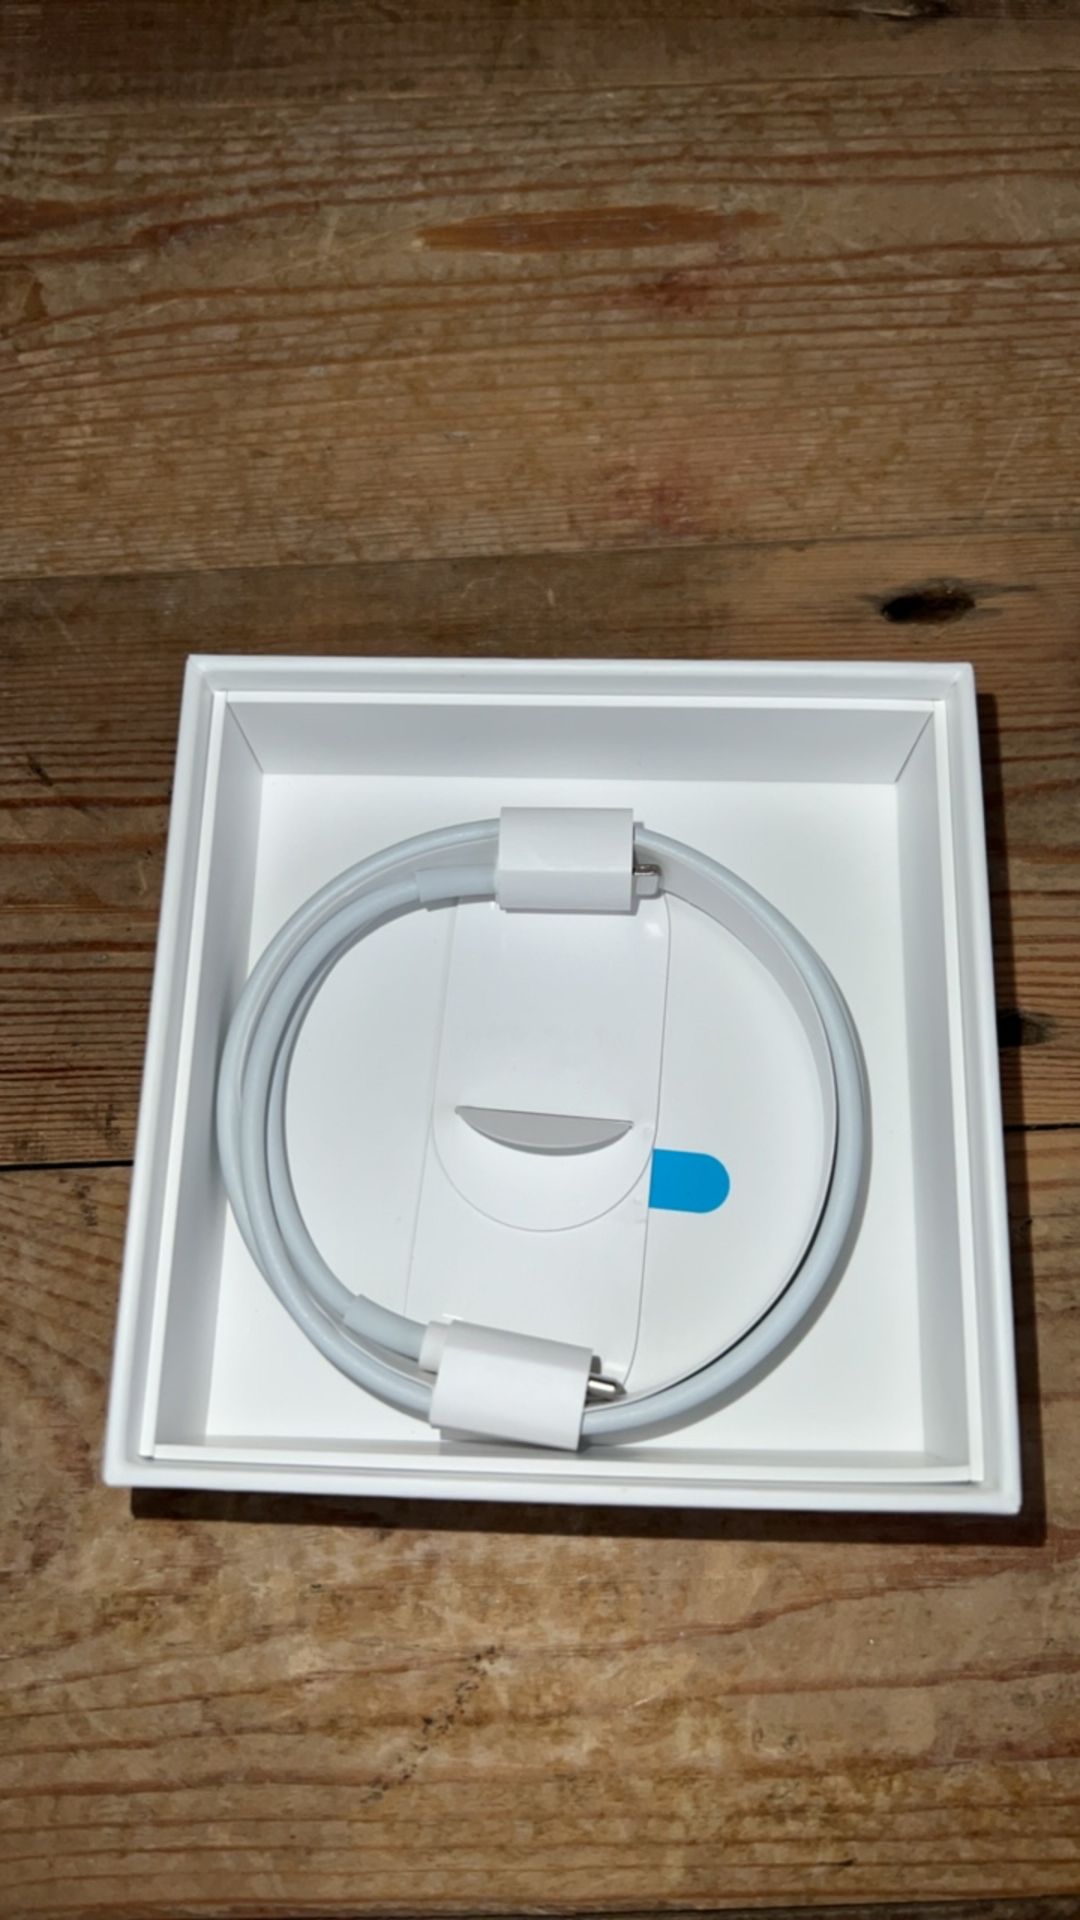 Apple Air Pods (3rd Generation) Charging Case Included - Image 5 of 5